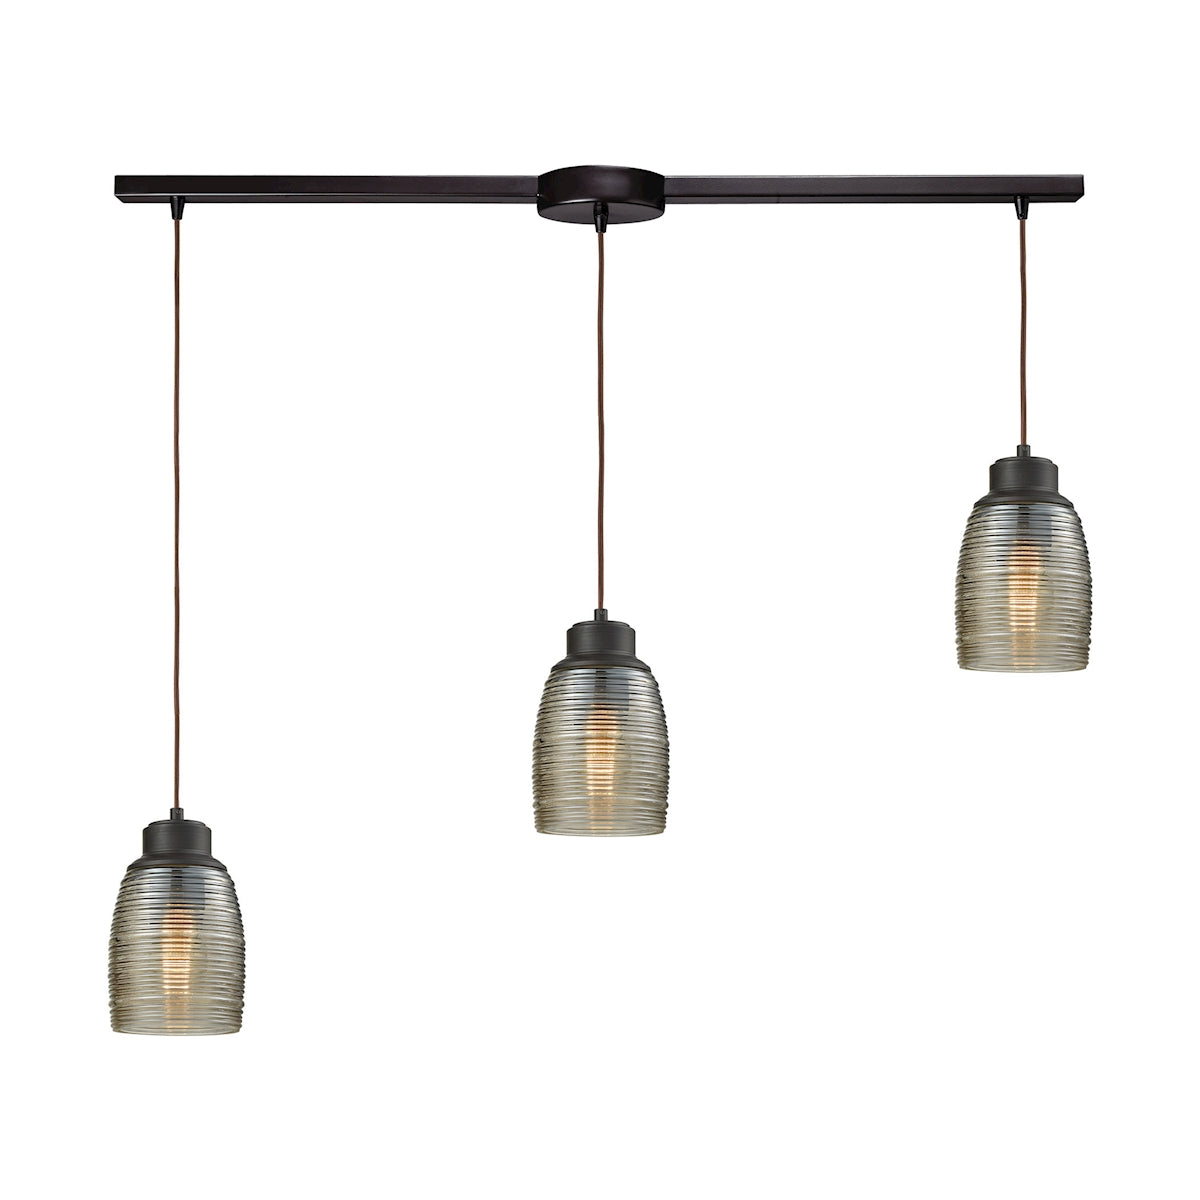 ELK Lighting 46216/3L Muncie 3-Light Linear Mini Pendant Fixture in Oil Rubbed Bronze with Champagne-plated Spun Glass